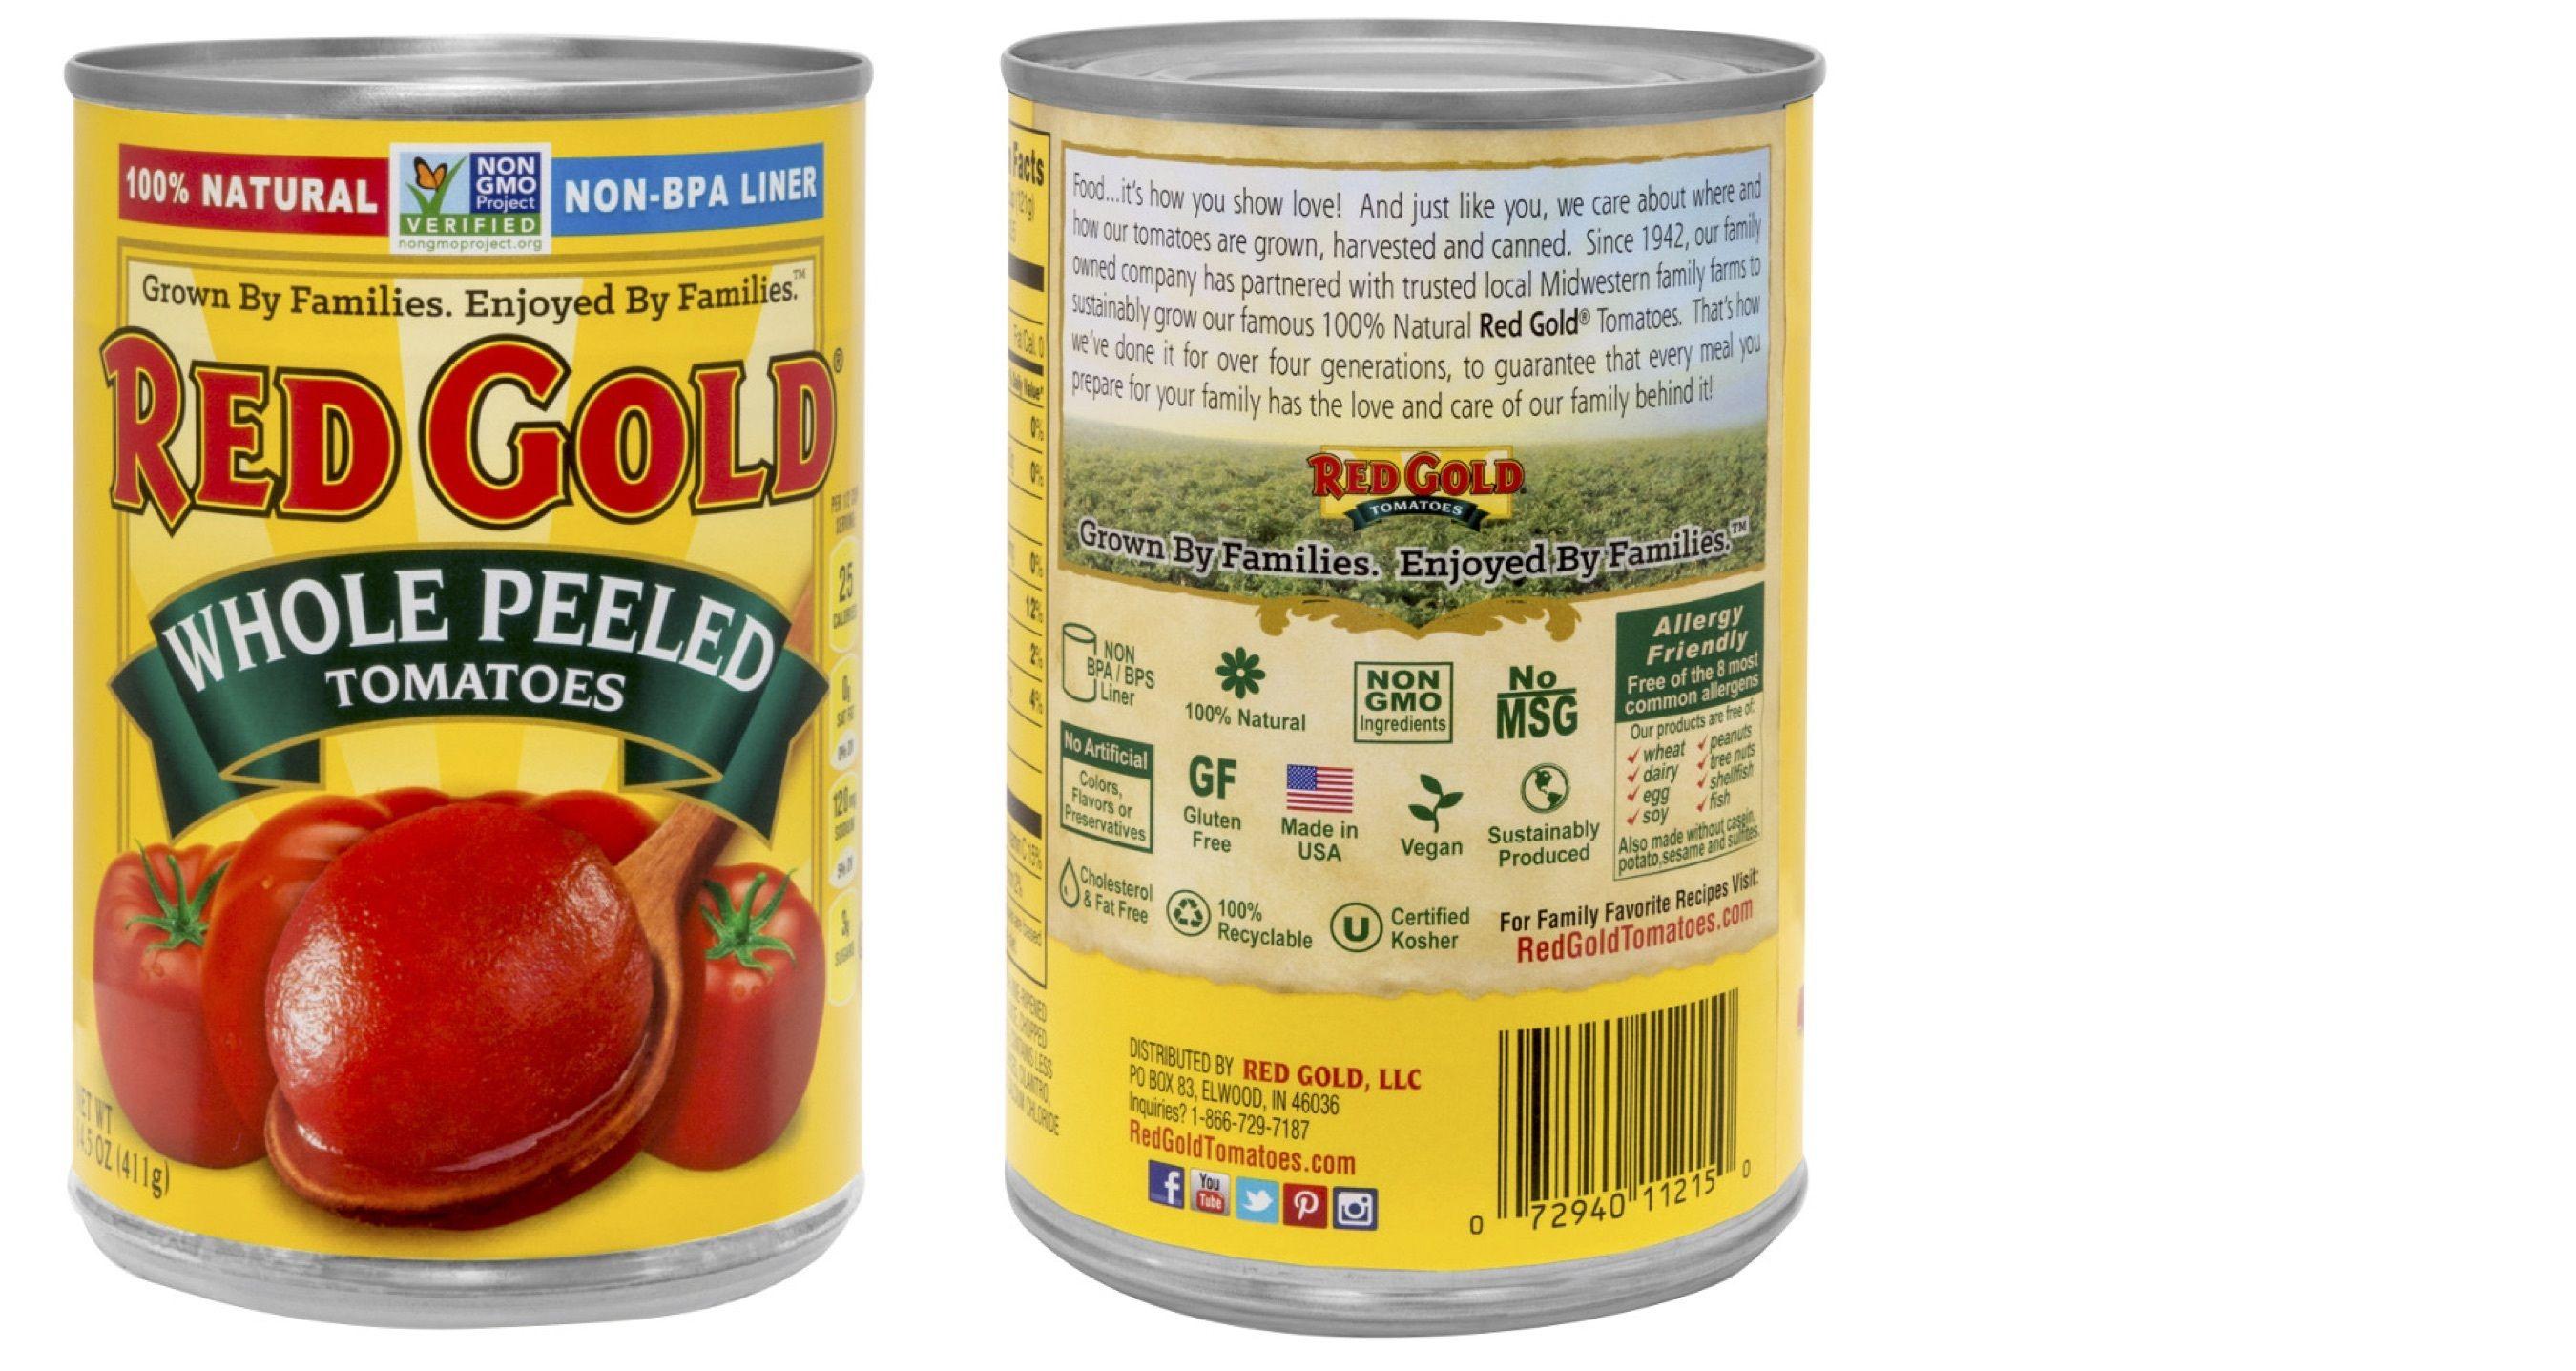 Red Gold Tomatoes Logo - Red Gold Leads the Clean Label Movement to Promote Product